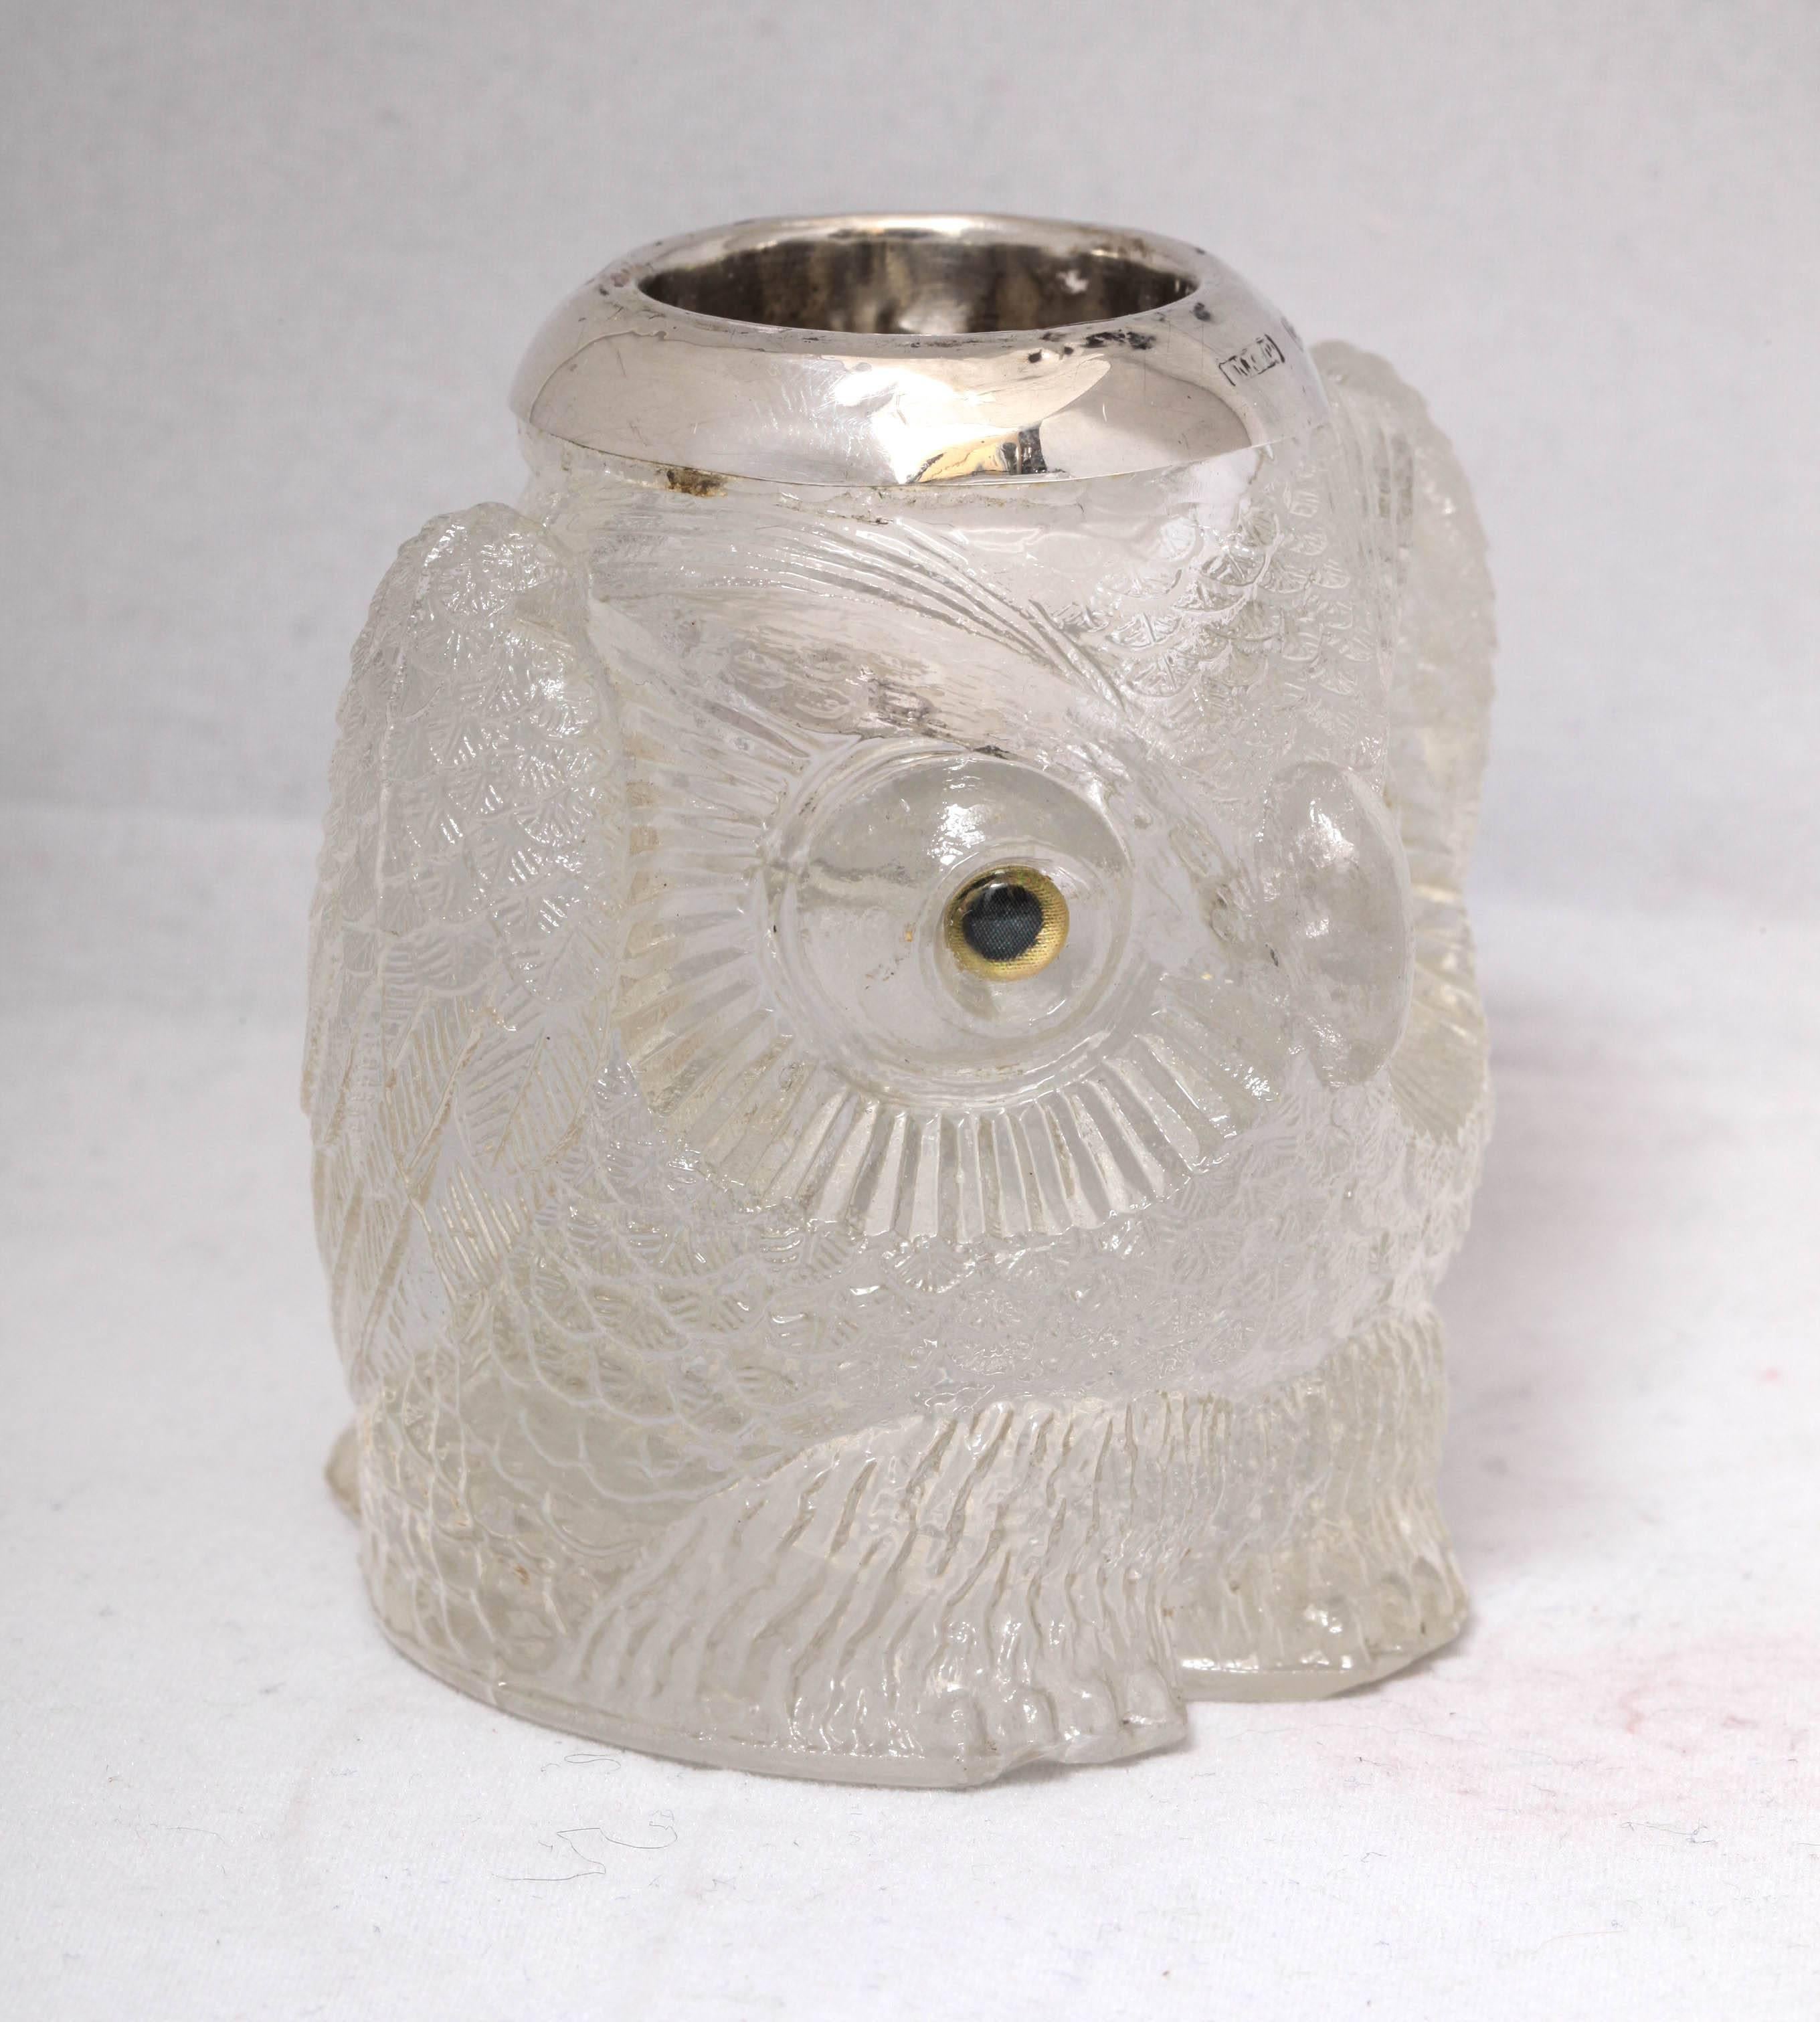 Rare and unusual Edwardian, sterling silver-mounted owl-form match striker with glass eyes, London, 1911, J.N. Kuhn & Co. - maker. Match 